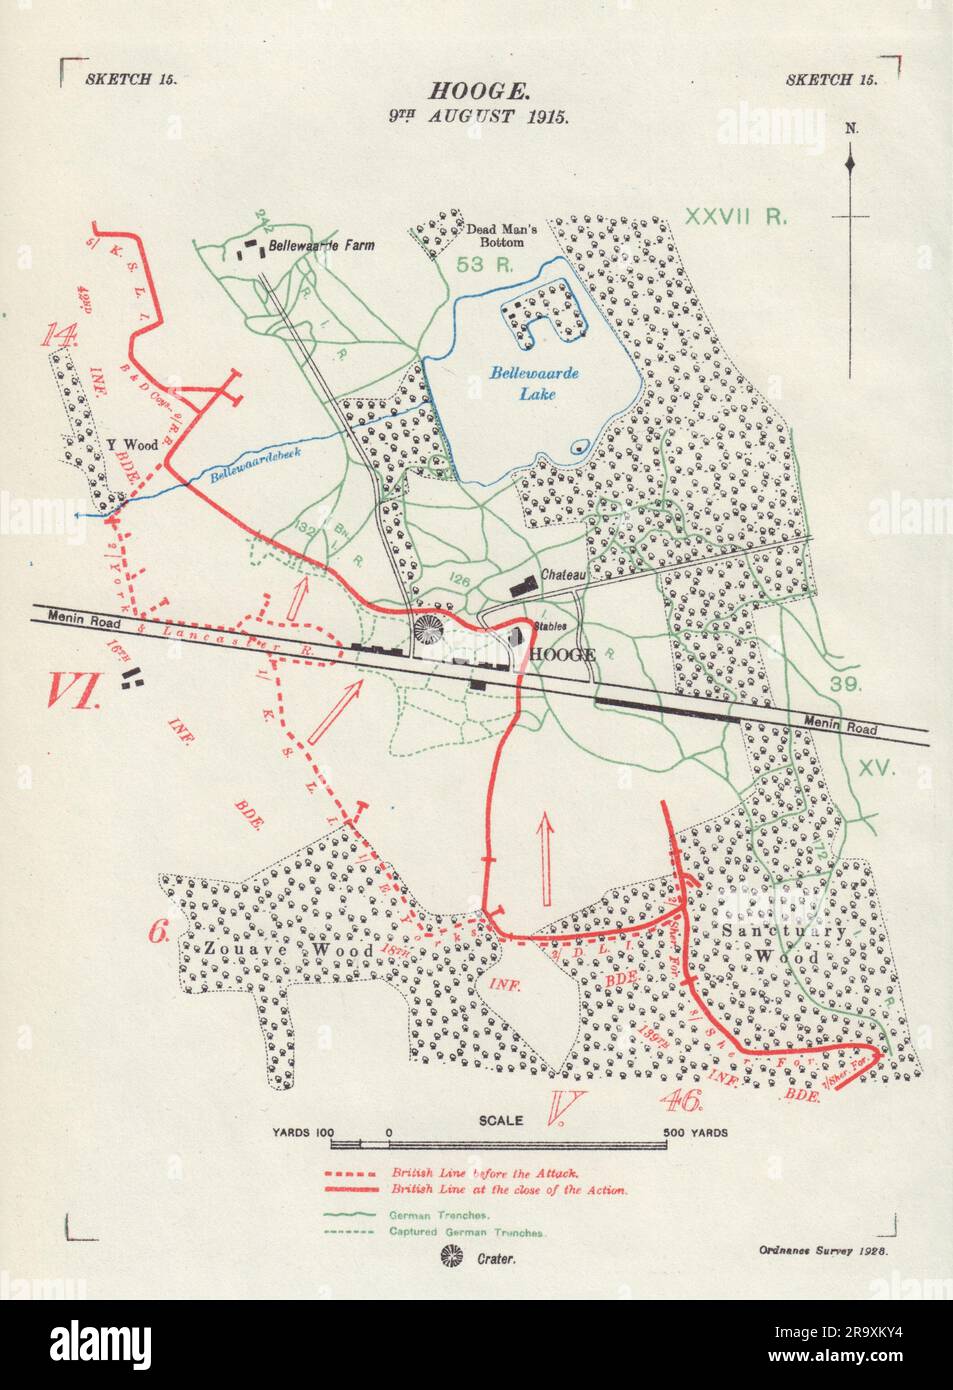 Hooge, 9th August 1915. Ypres Salient. First World War. Trenches 1928 old map Stock Photo